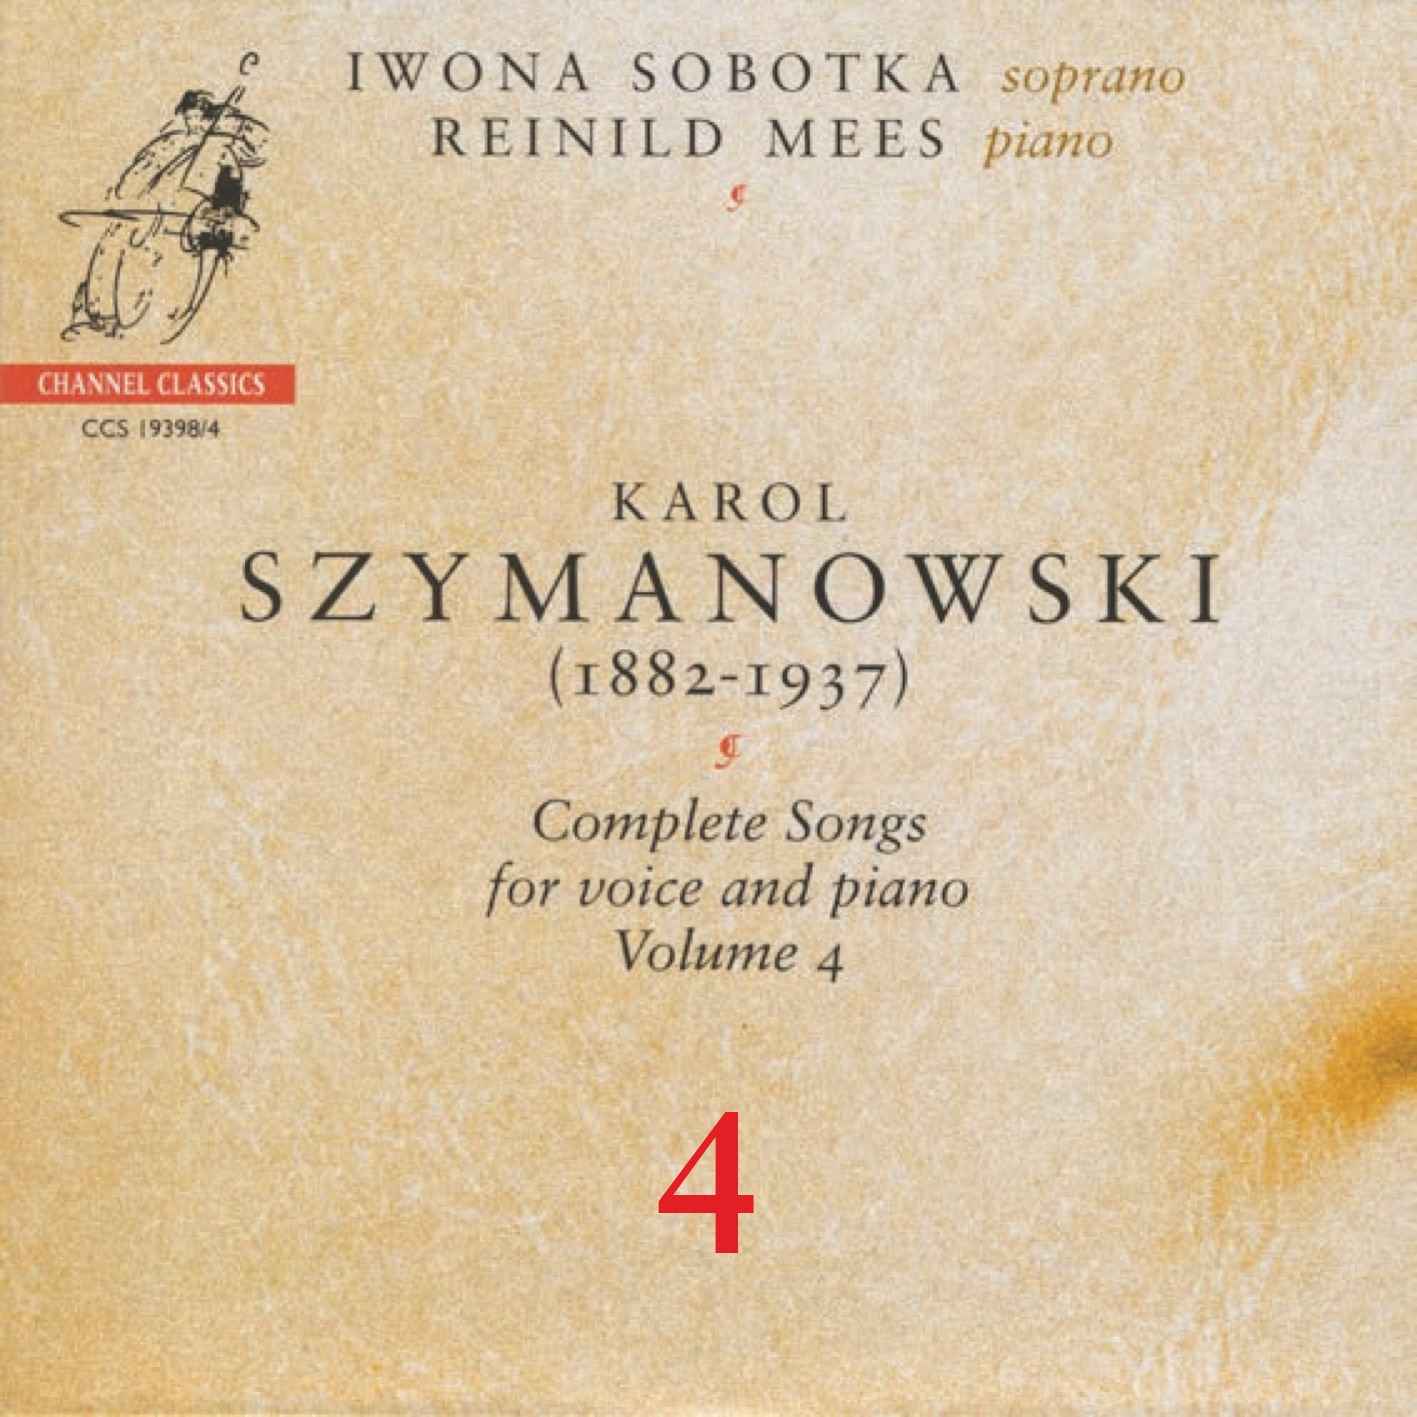 Iwona in Szymanowksi: Complete Songs for Voice and Piano (Volume 4)